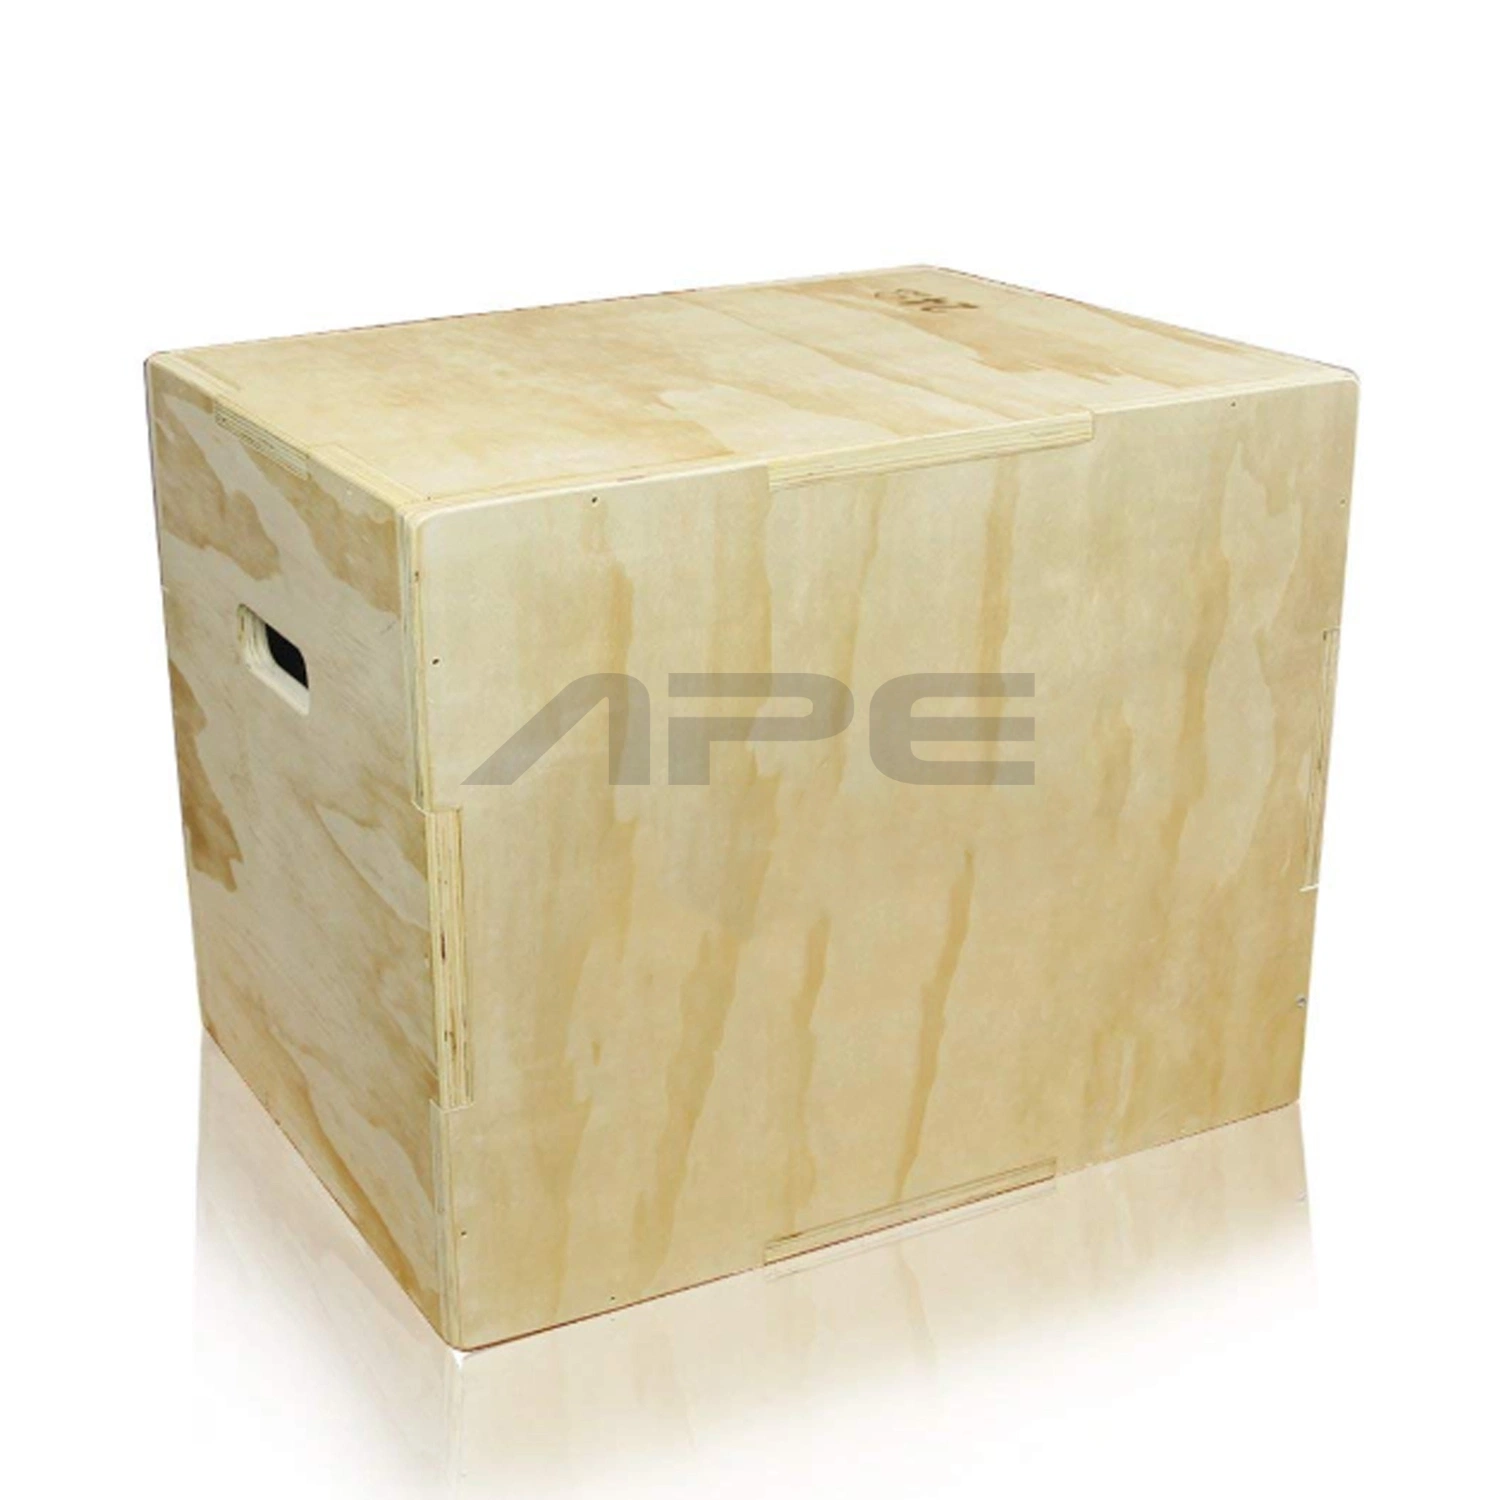 Ape Gym Exercise Equipment Sports Goods High-Density Plywood Woodern Jump Boxes